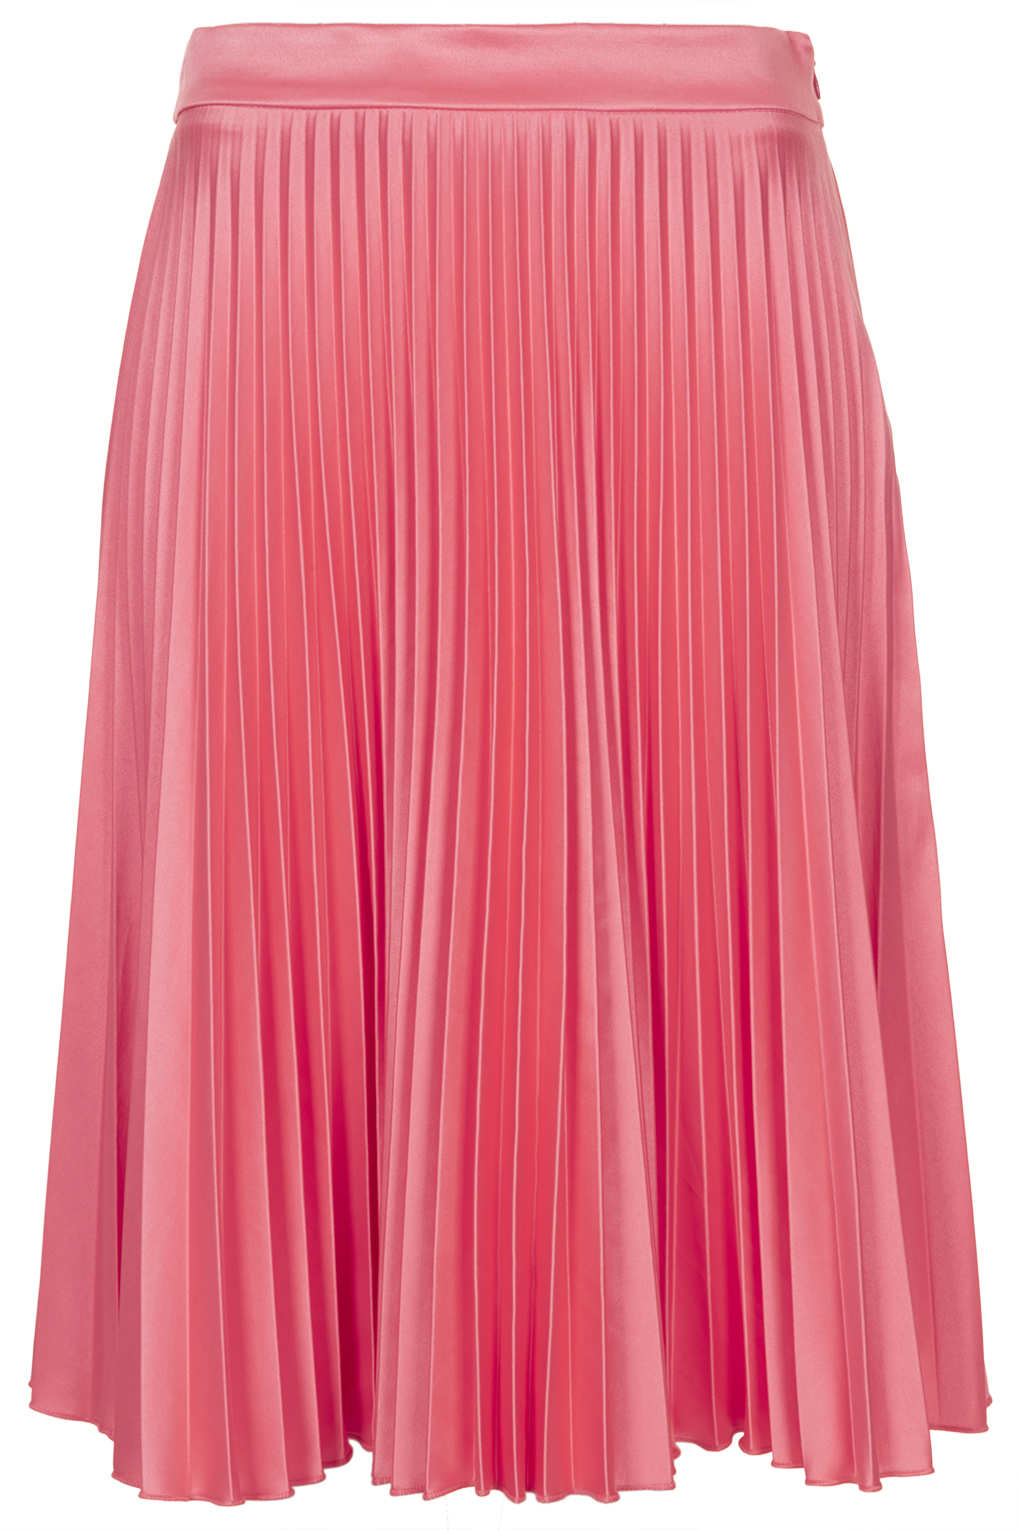 Lyst - Topshop Pink Sunray Pleat Skirt in Pink